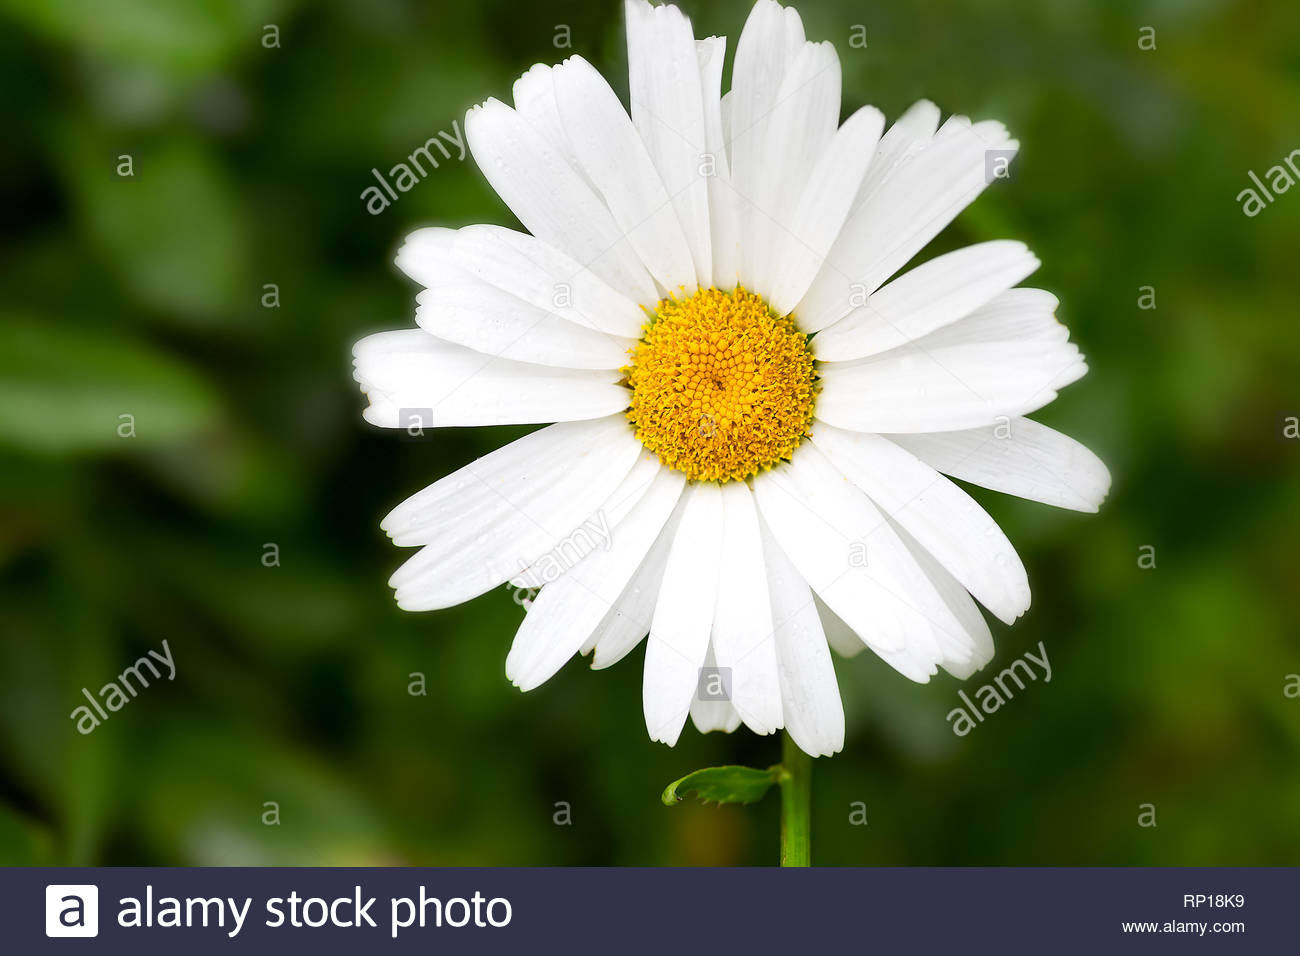 Large White Daisy Flower Close Up On A Green Background Desktop